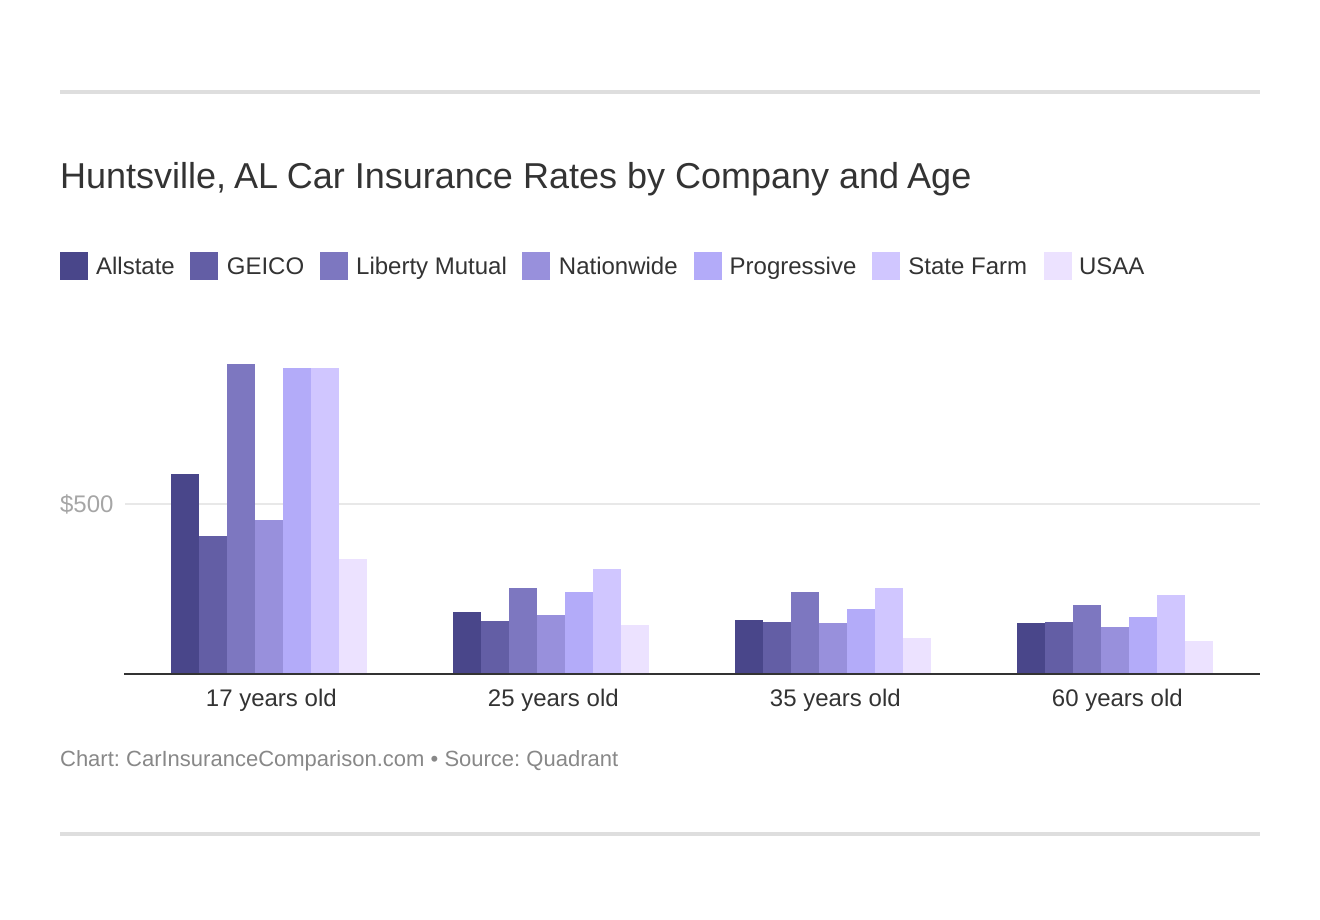 Huntsville, AL Car Insurance Rates by Company and Age